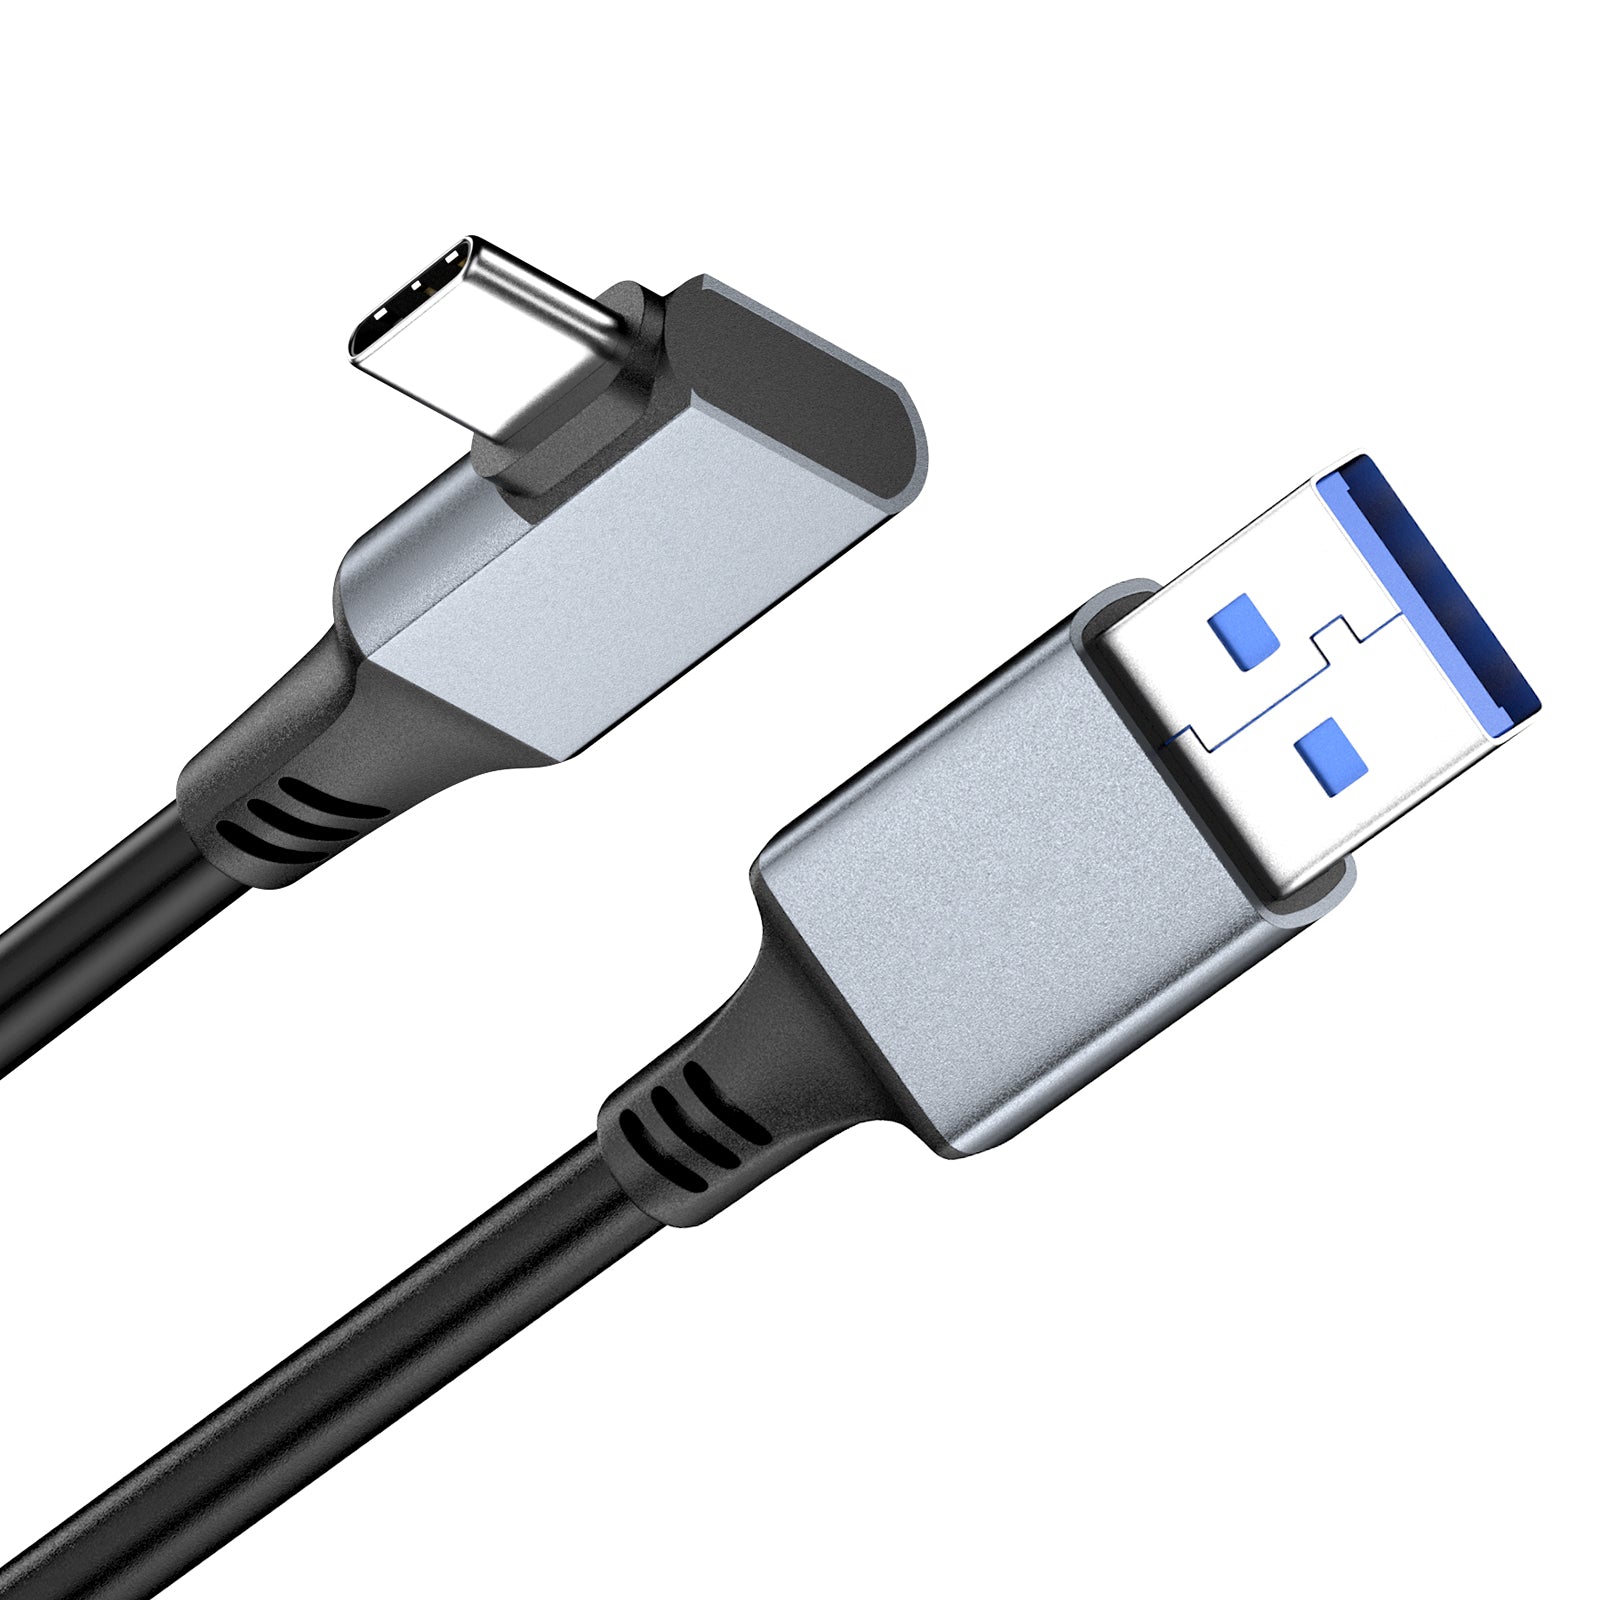 High Speed USB Type-C PC VR Link Cable - Oculus Quest, Quest 2